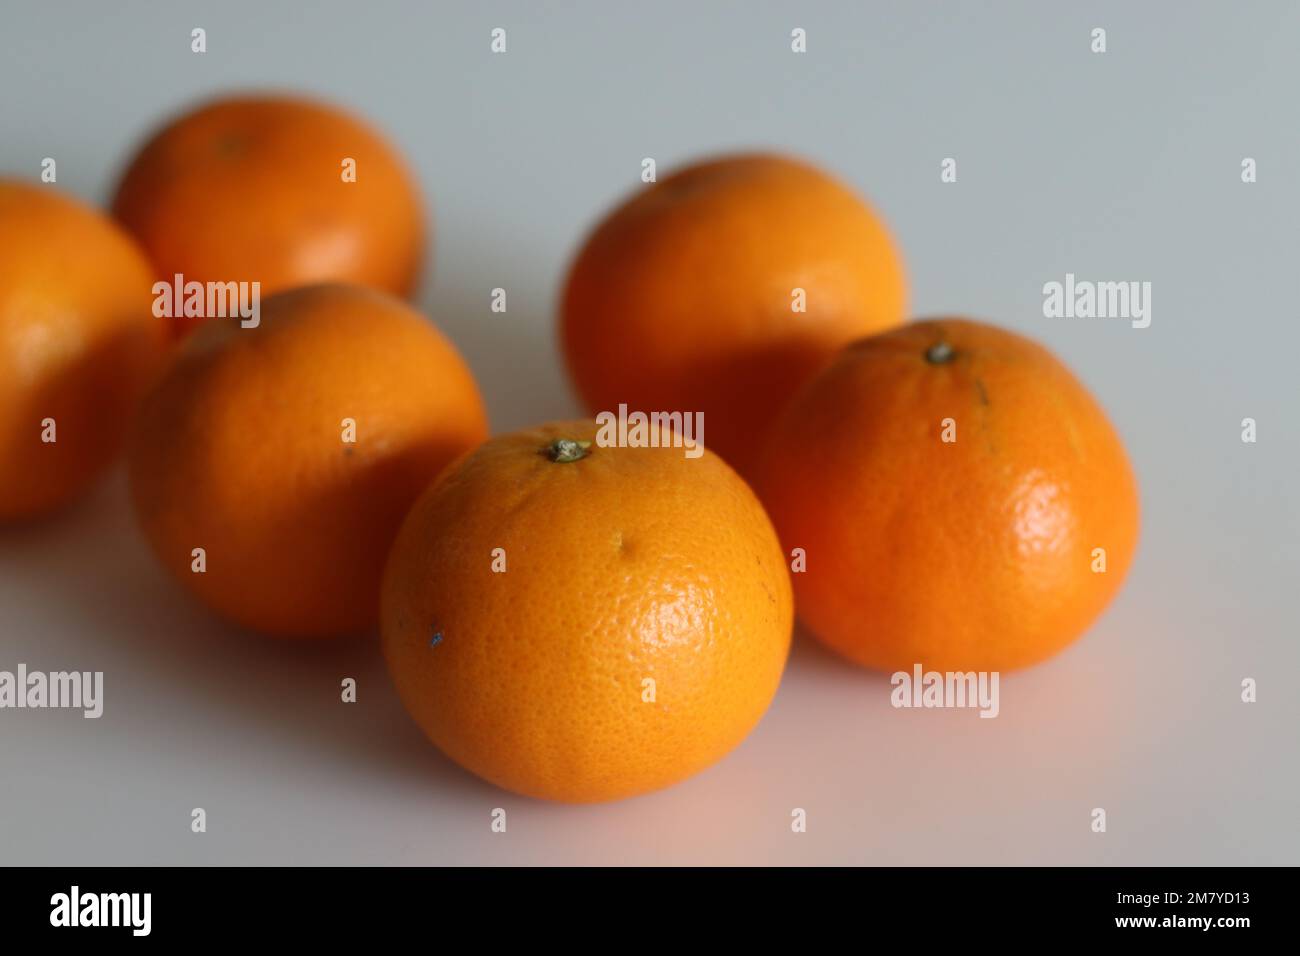 Malta or Valencia Orange is a citrus fruit grown in India, commonly called as sangtra. It is a large orange variety with a smooth and pebbled surface Stock Photo